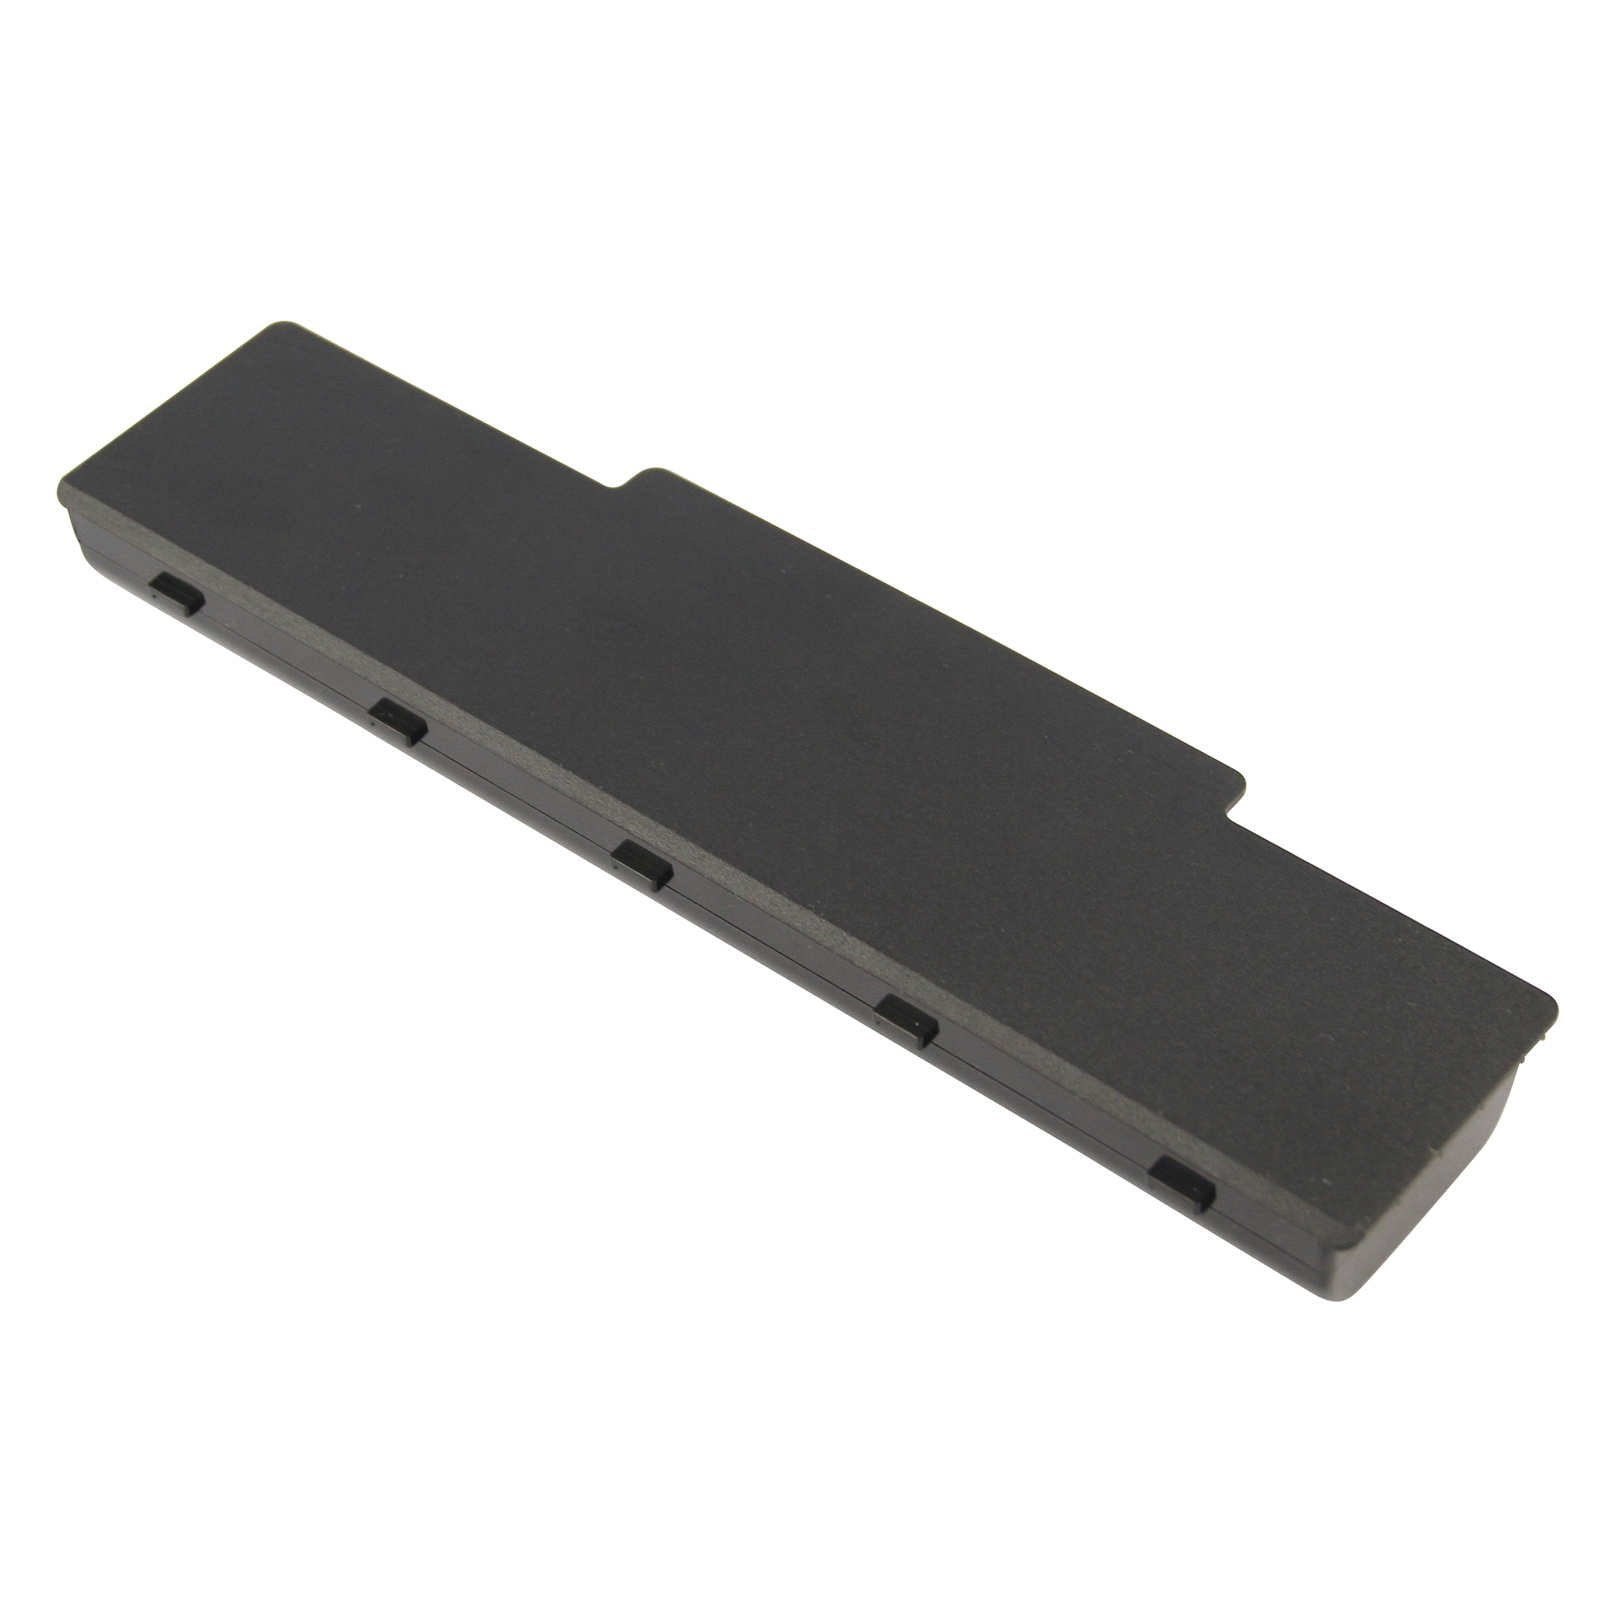 AS07A31 Replacement Acer Aspire 4730-4901, Aspire 5740G-524G64Mnb, 5738G Replacement Laptop Battery